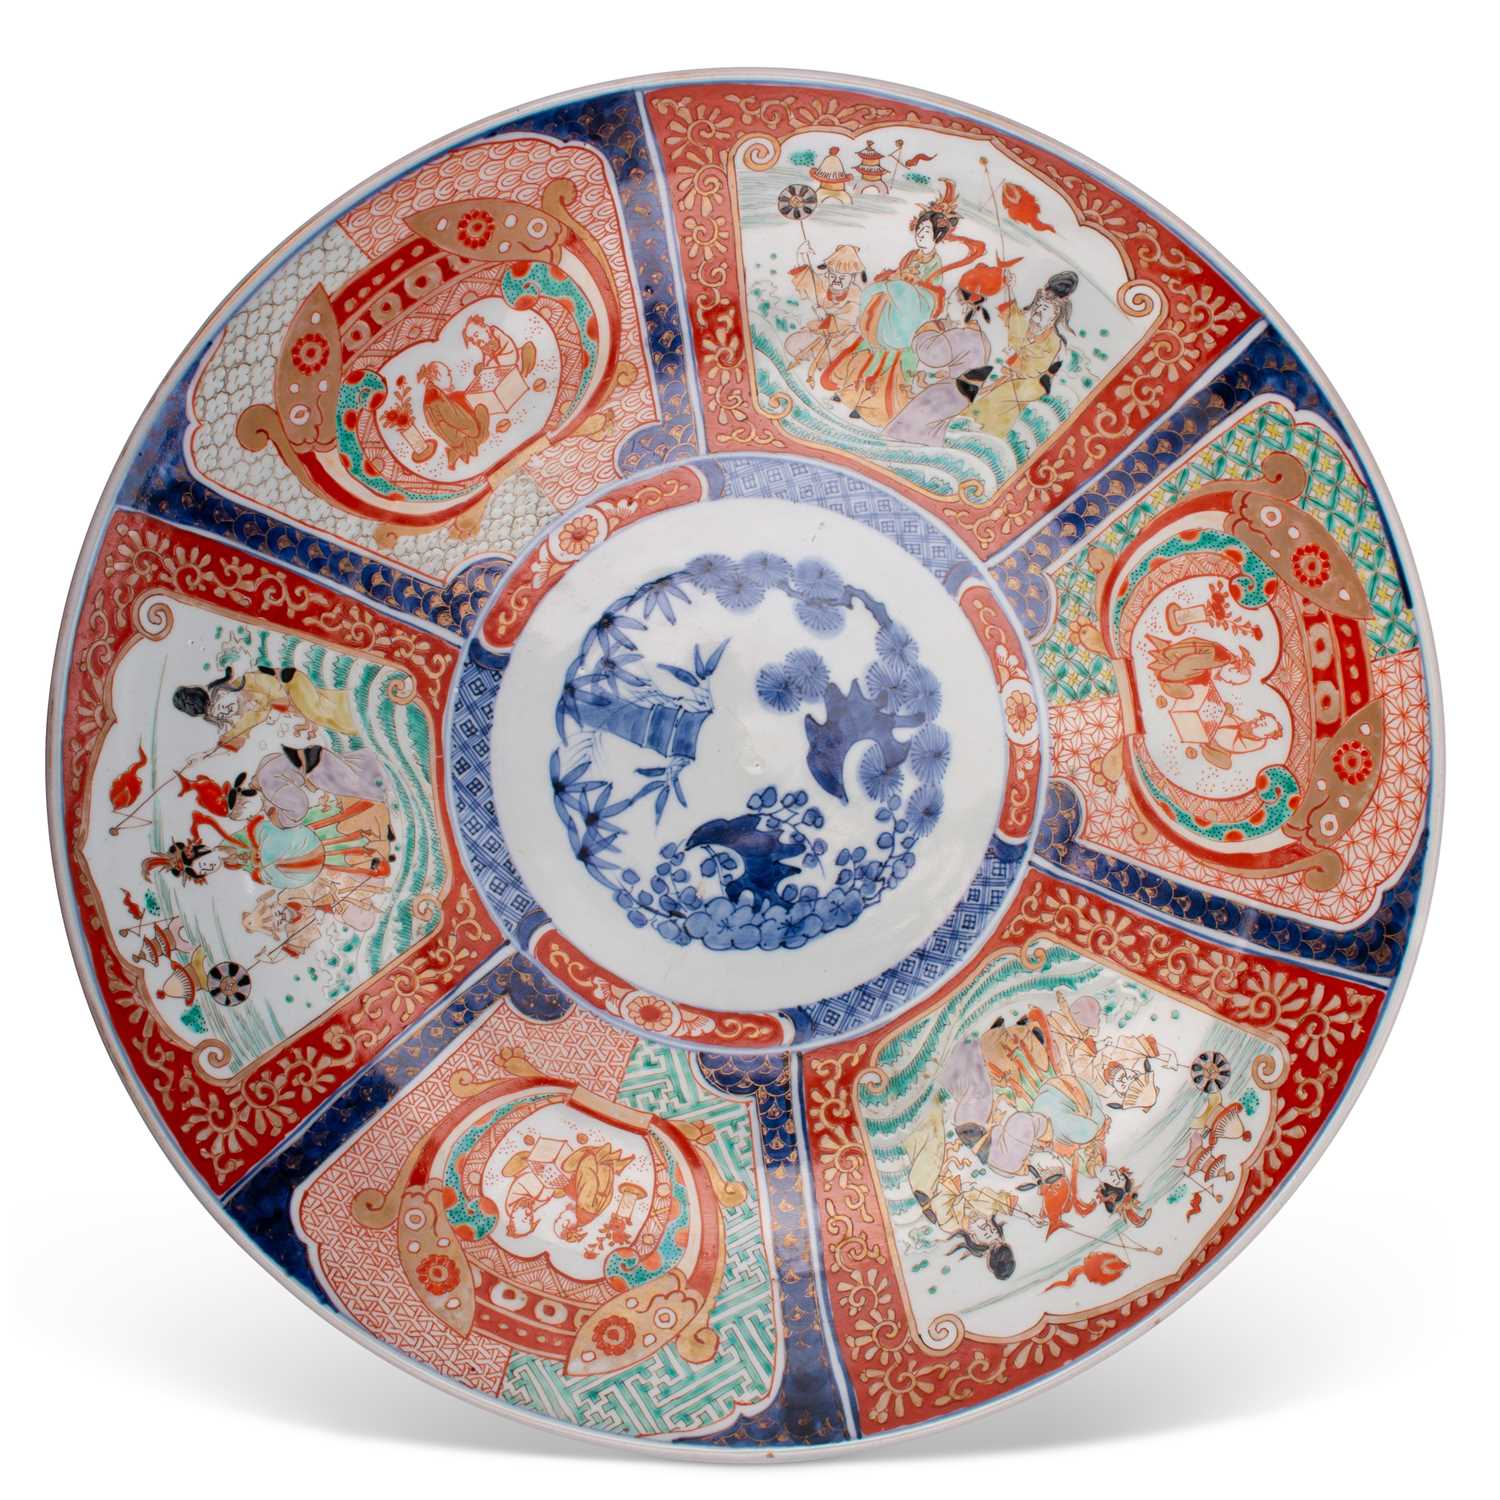 Lot 138 - A LARGE JAPANESE IMARI CHARGER, 19TH CENTURY